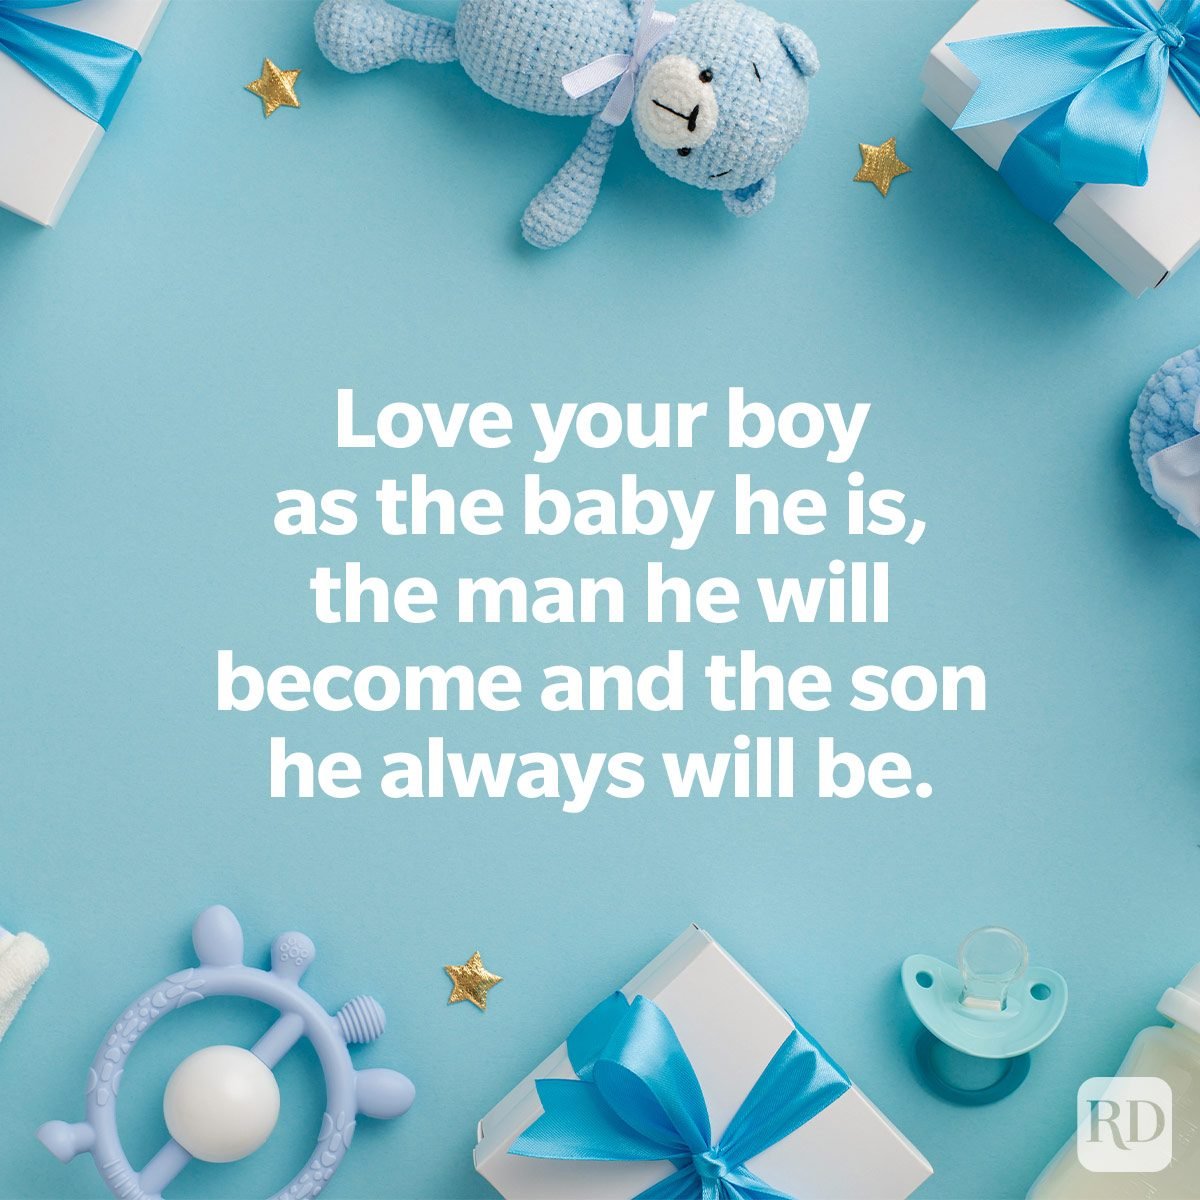 sweet baby wishes to send to expectant parents on baby toys and items background flat lay Love your boy as the baby he is, the man he will become and the son he always will be.